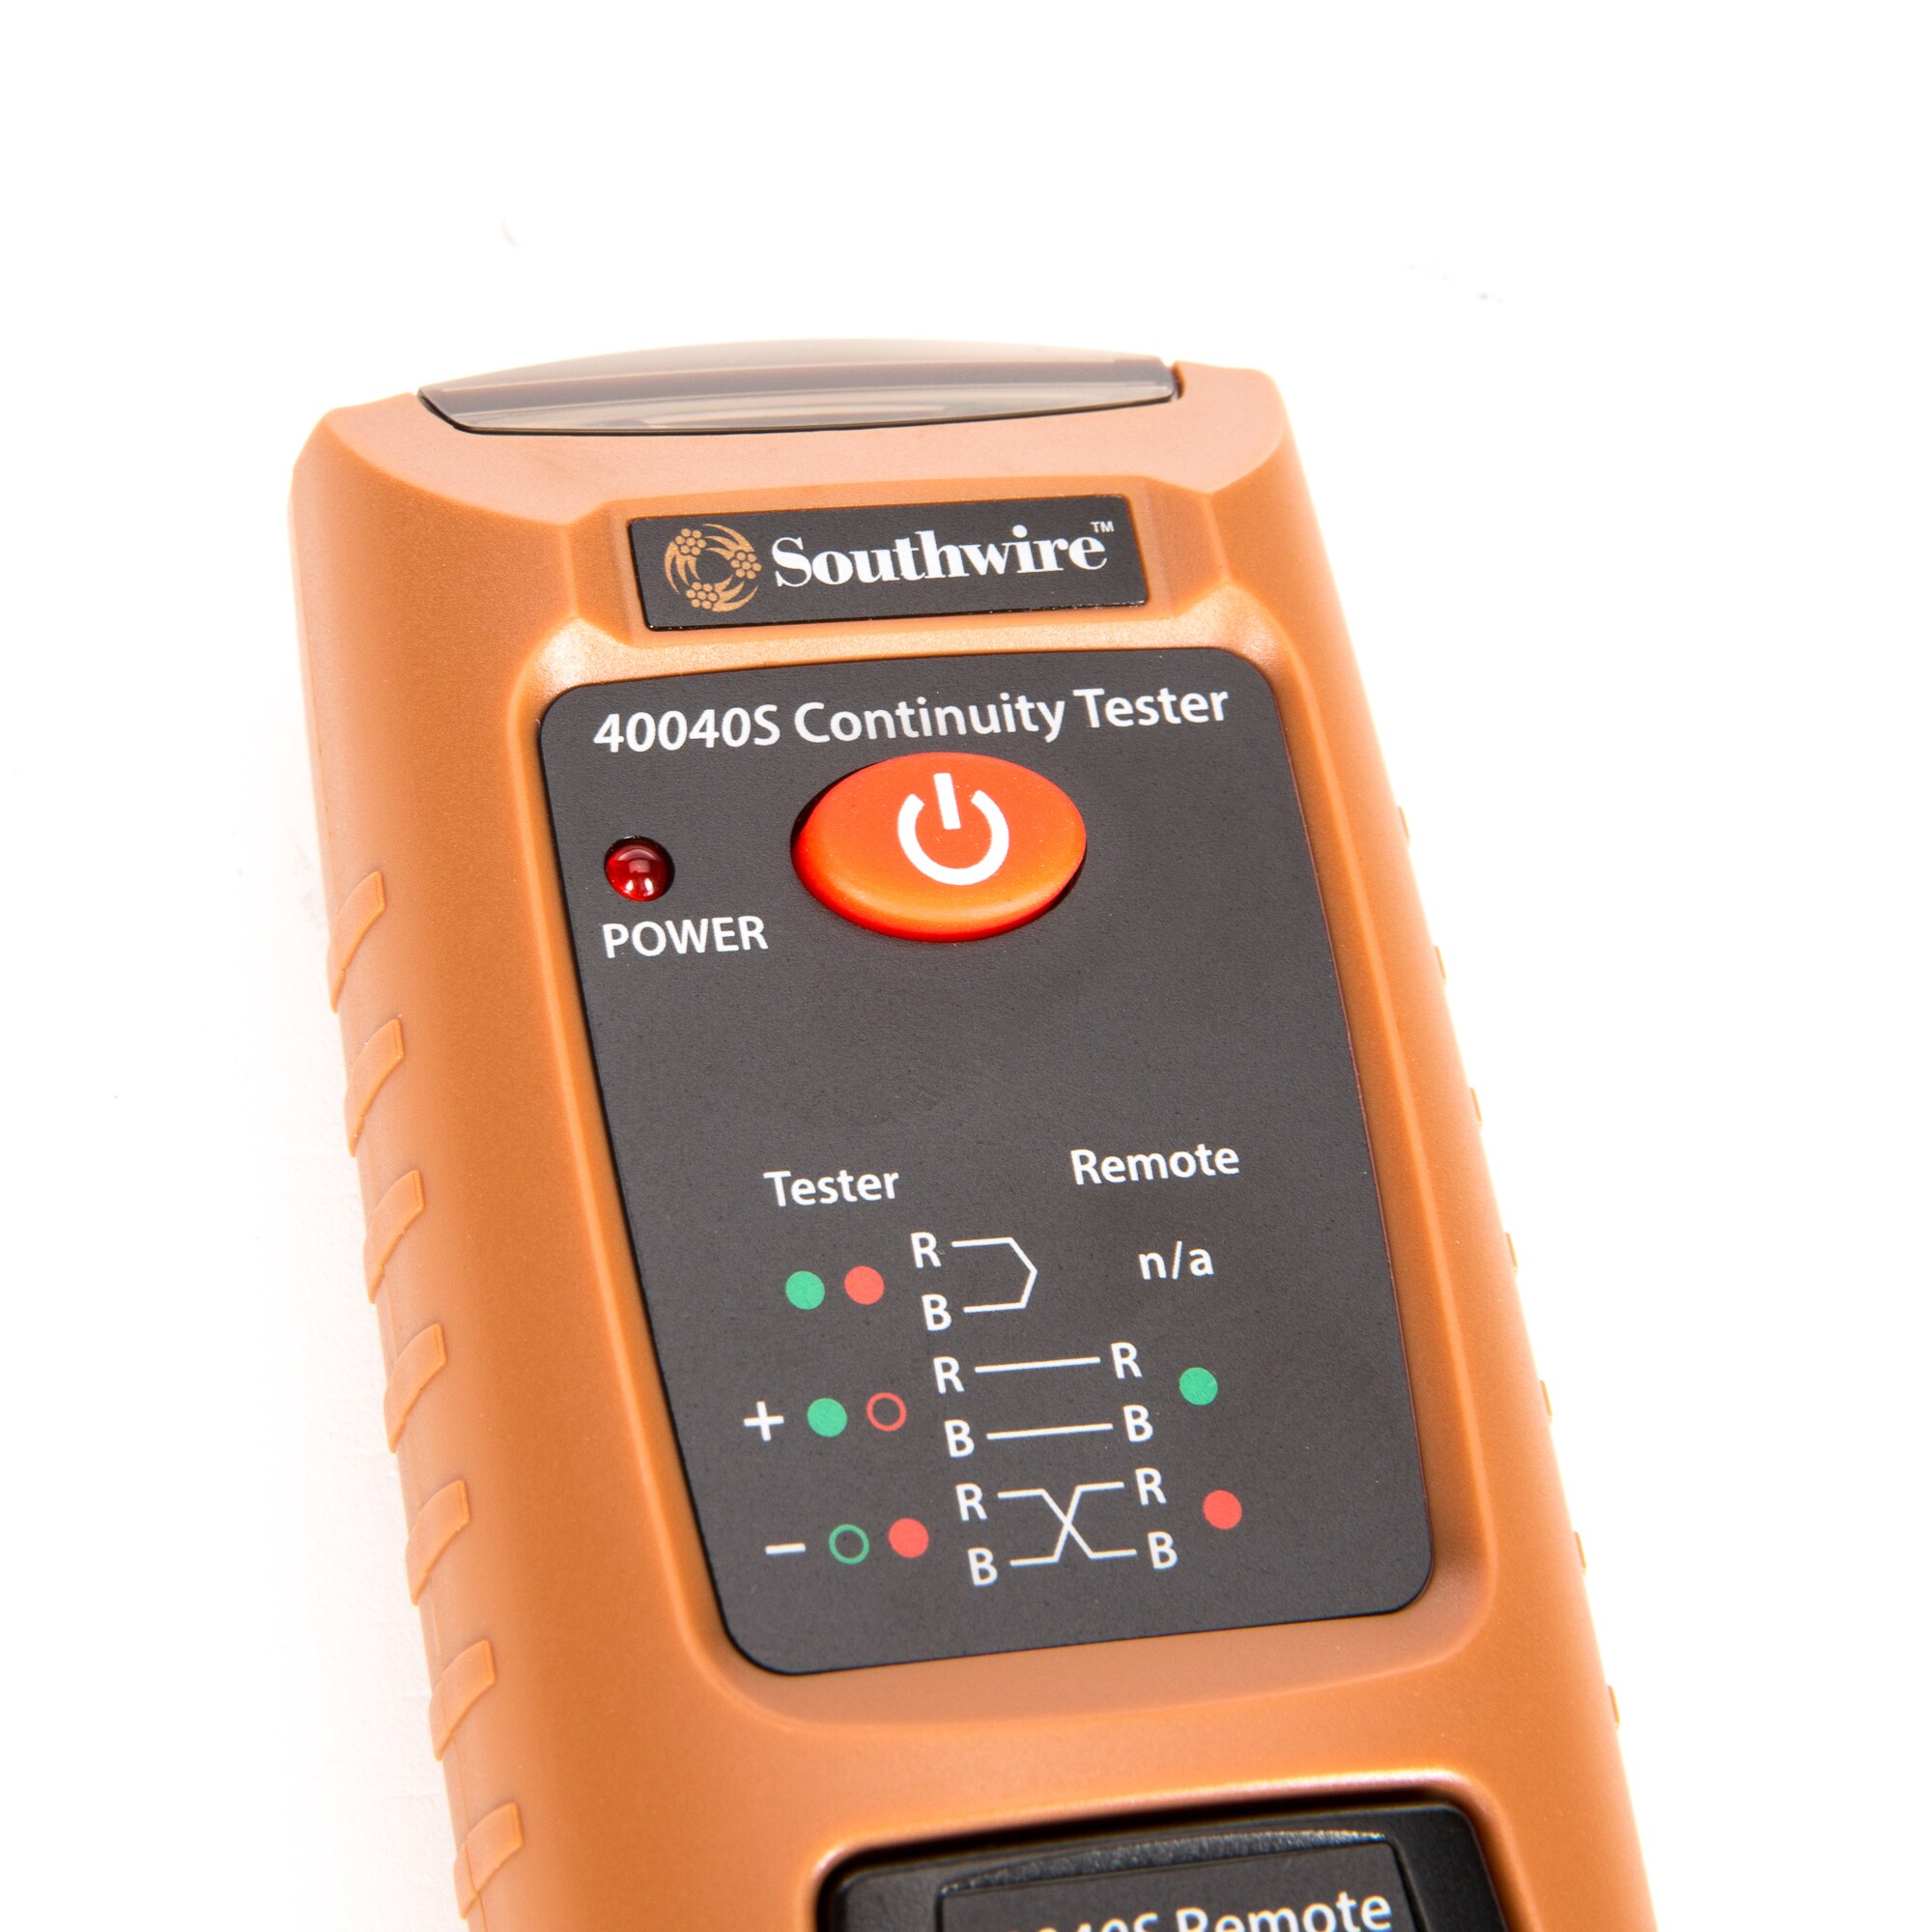 Southwire Tools 40040S Pro Continuity Tester With Remote for sale online 